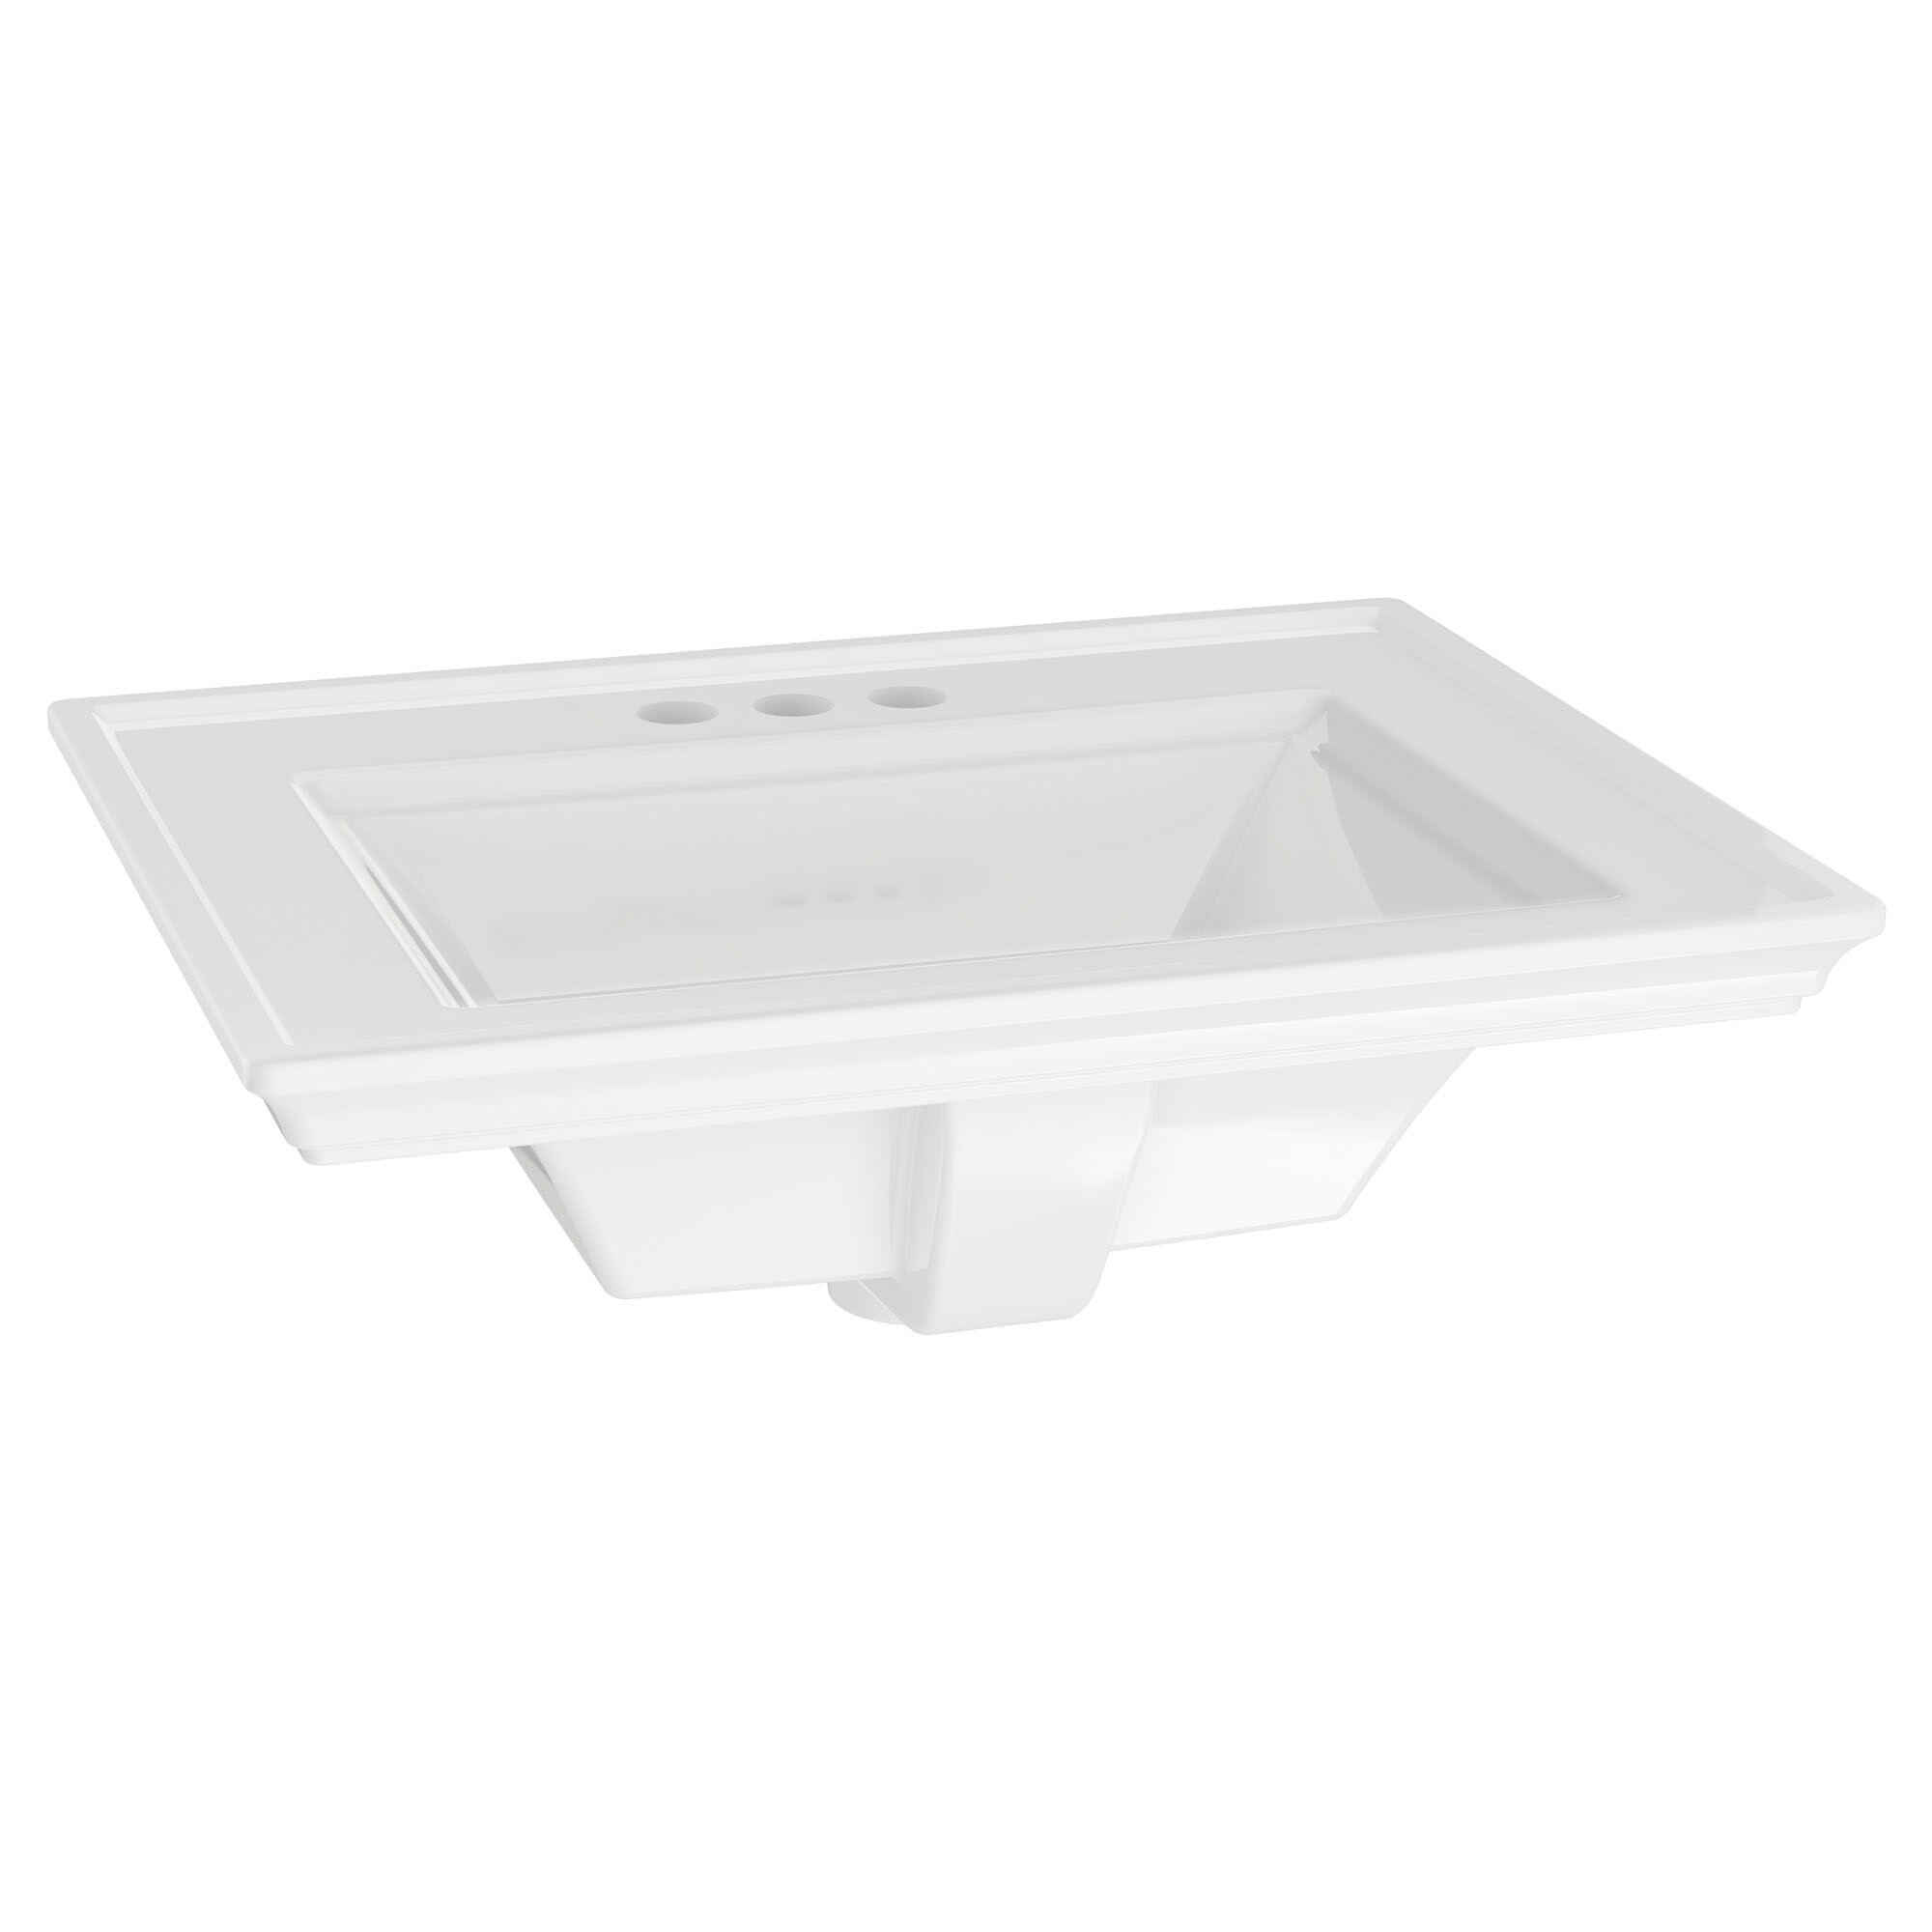 American Standard Town square s White Fire Clay Drop-In Rectangular Modern Bathroom Sink (24-in x 19.0625-in)